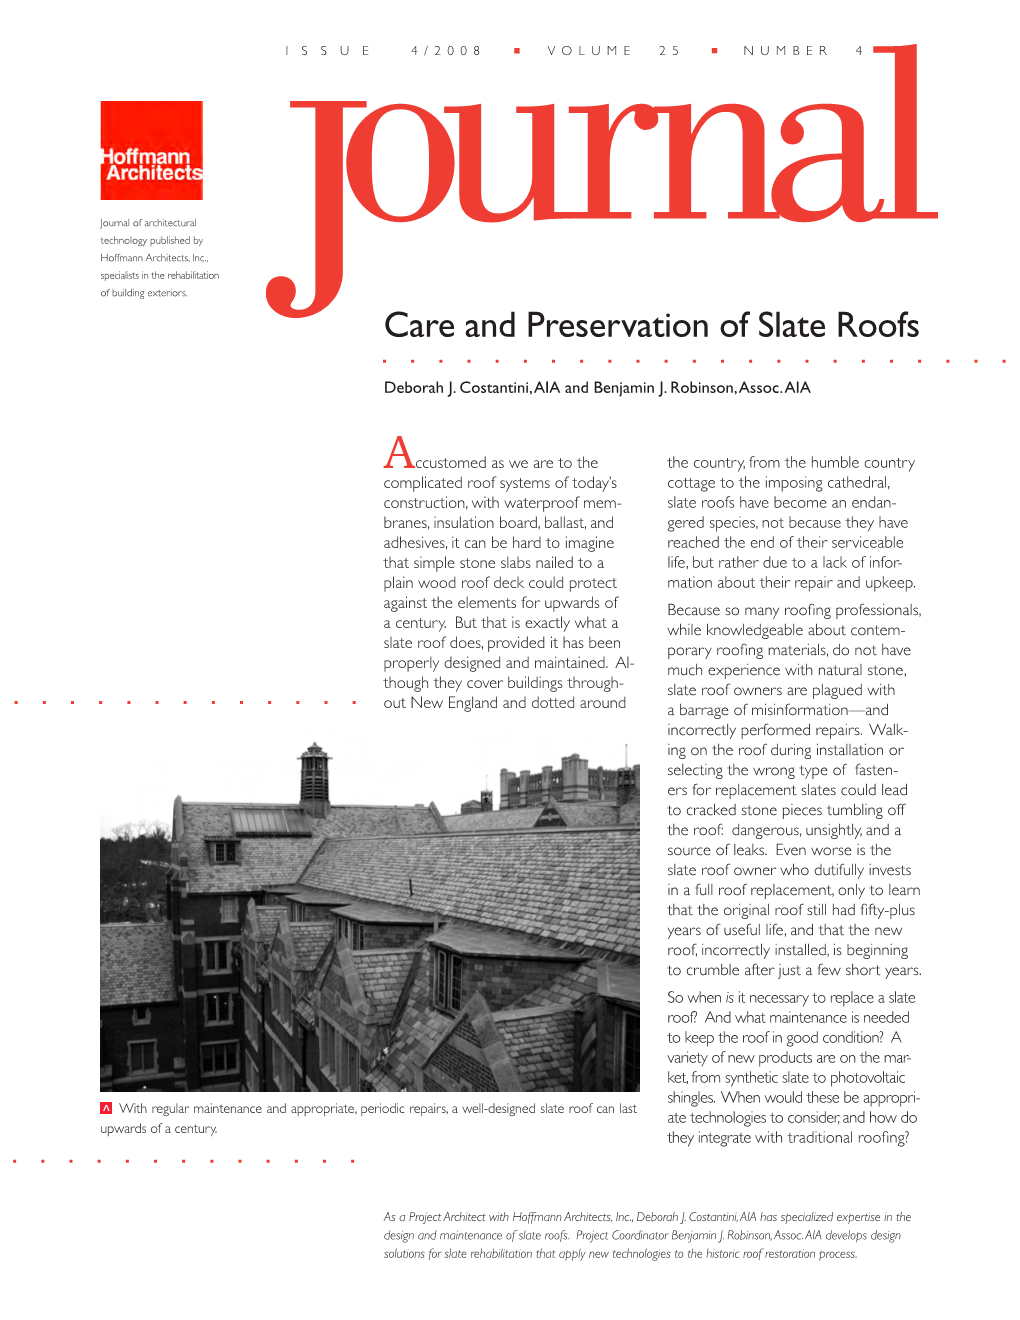 Care and Preservation of Slate Roofs